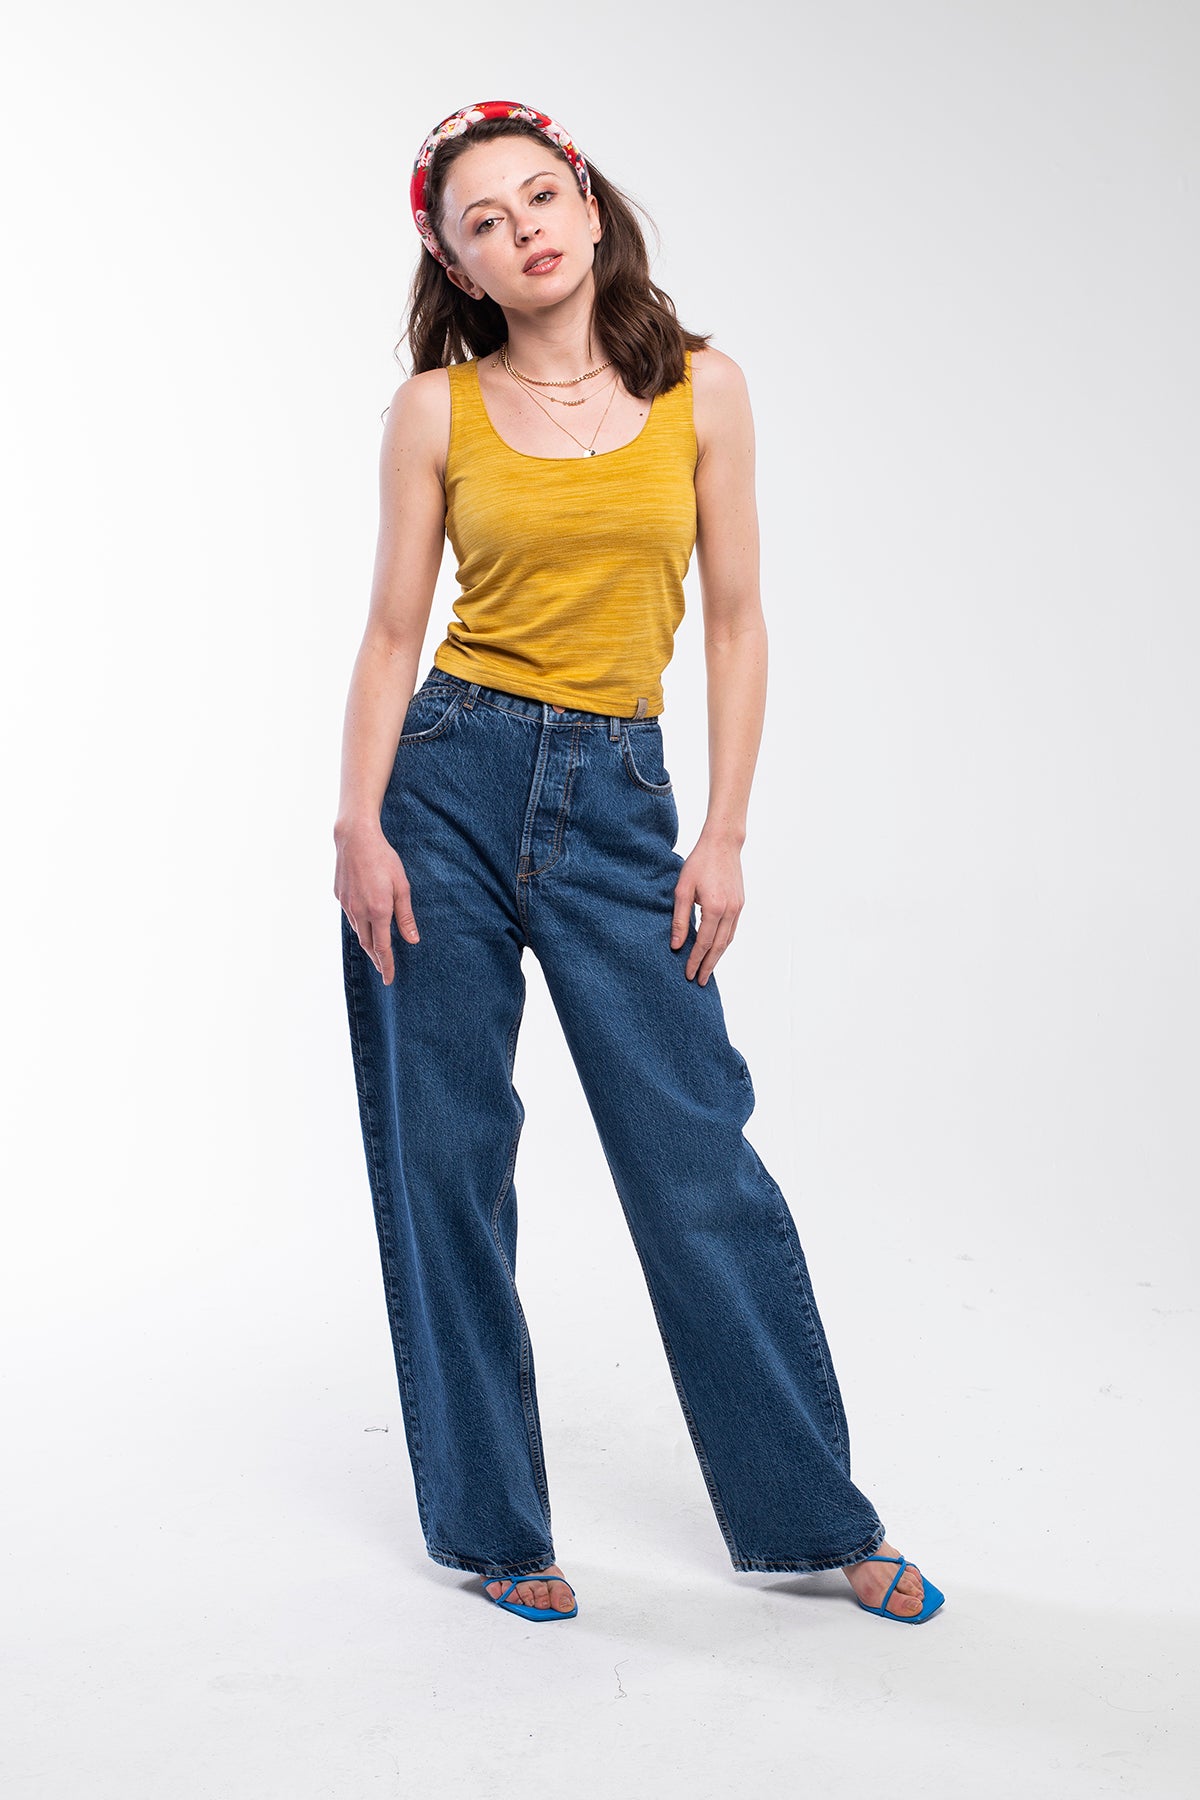 This top features a cropped length and a soft, knitted material in mustard yellow.